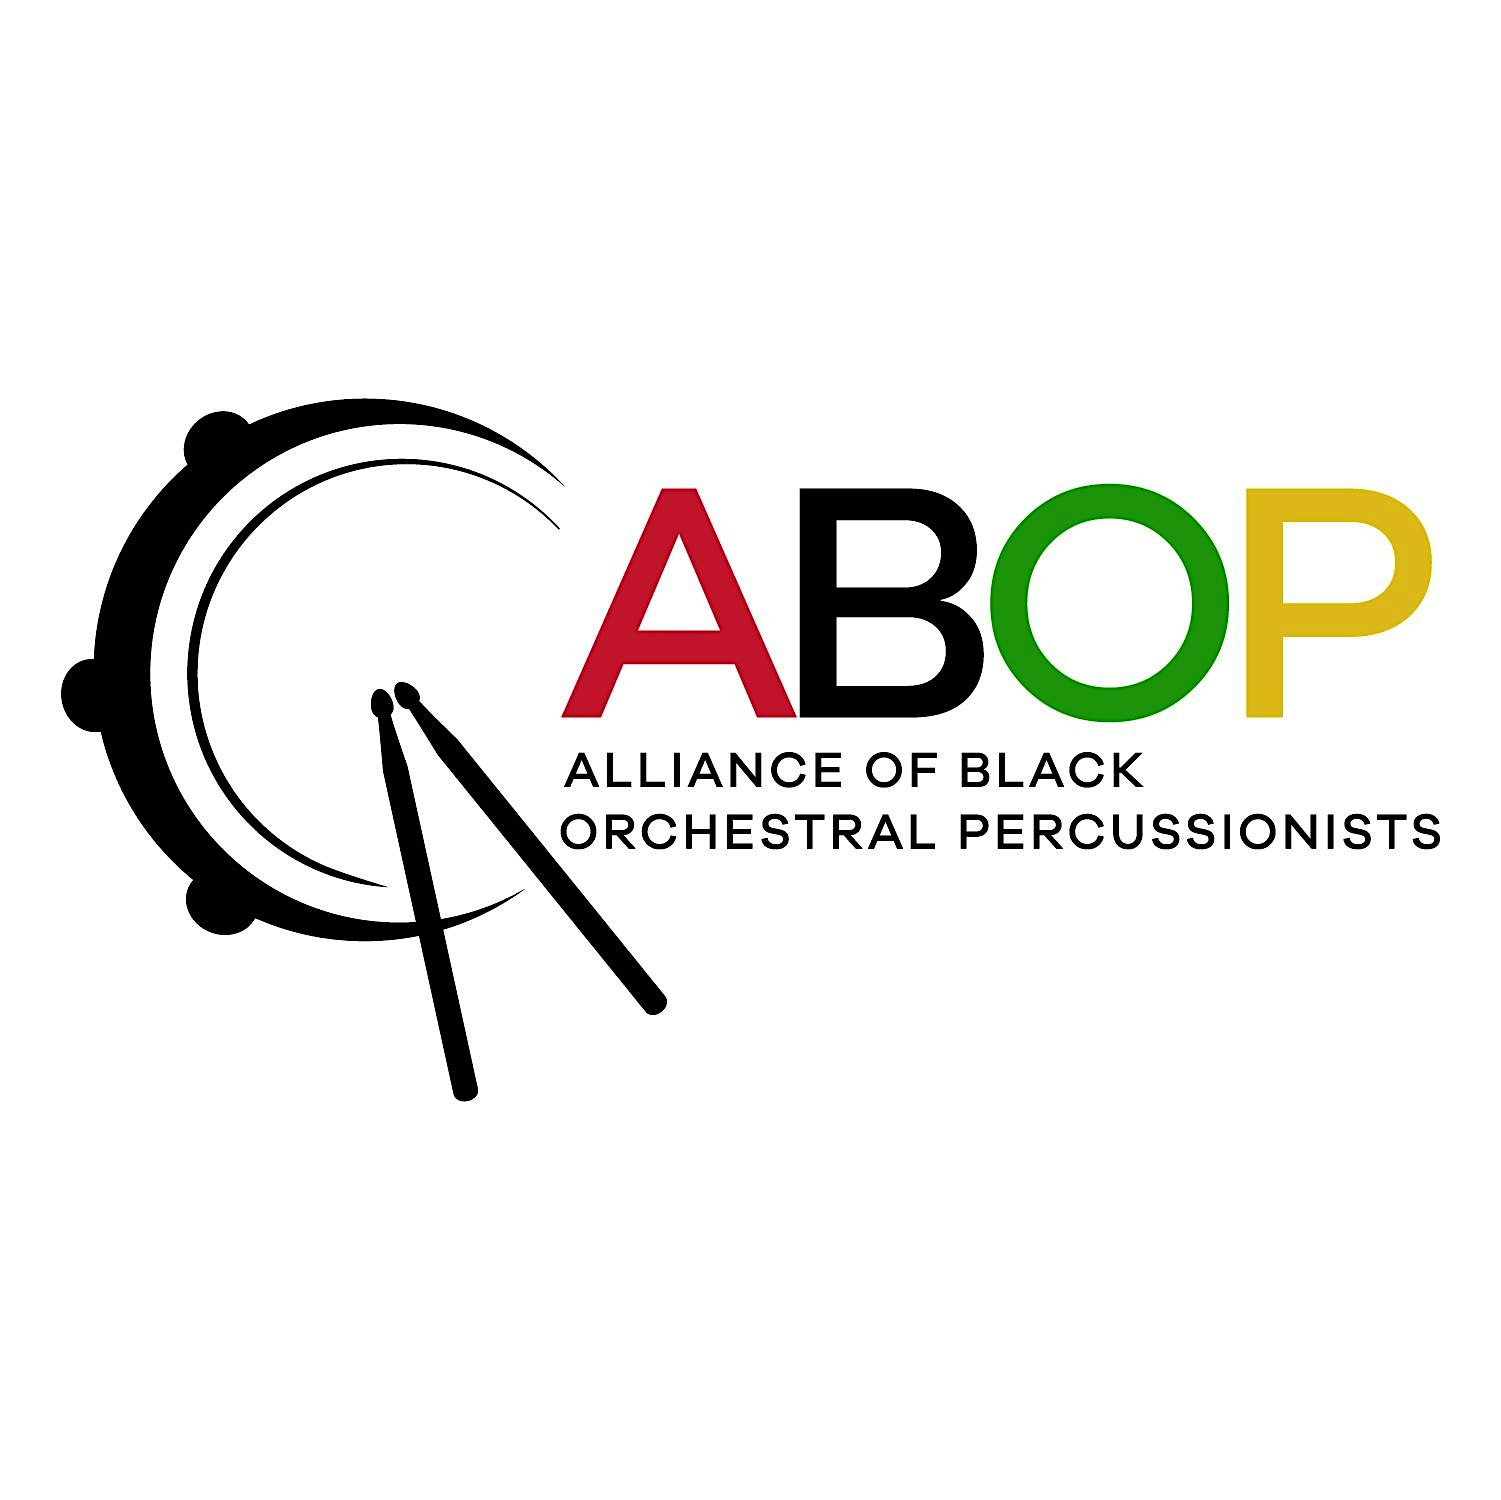 Alliance of Black Orchestral Percussionists (ABOP)